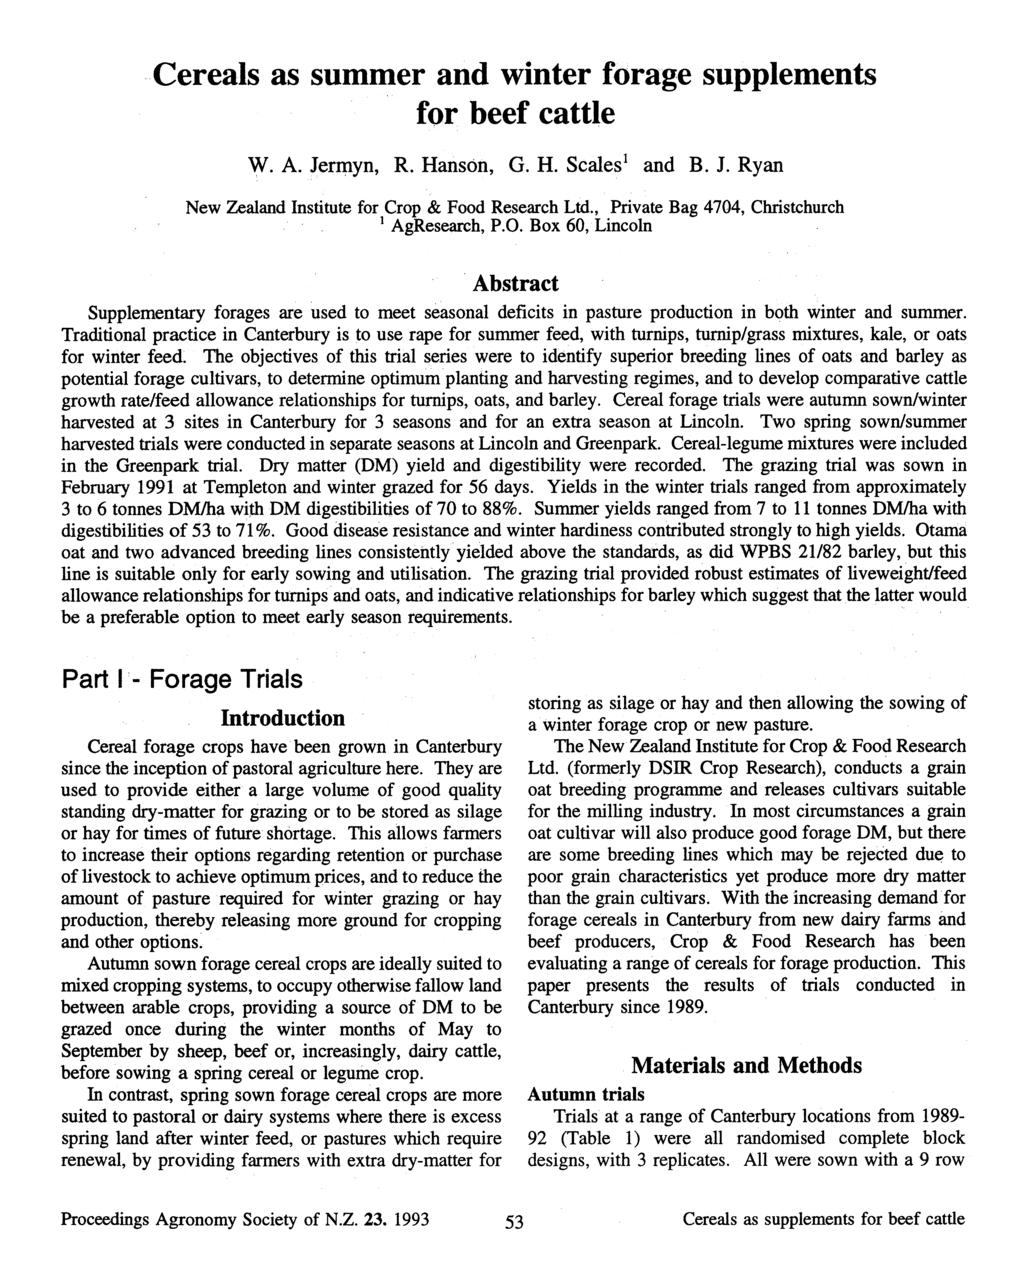 Cereals as summer and winter forage supplements for beef cattle W. A. Jermyn, R. Hanson, G. H. Scales' and B. J. Ryan New Zealand Institute for Crop & Food Research Ltd.